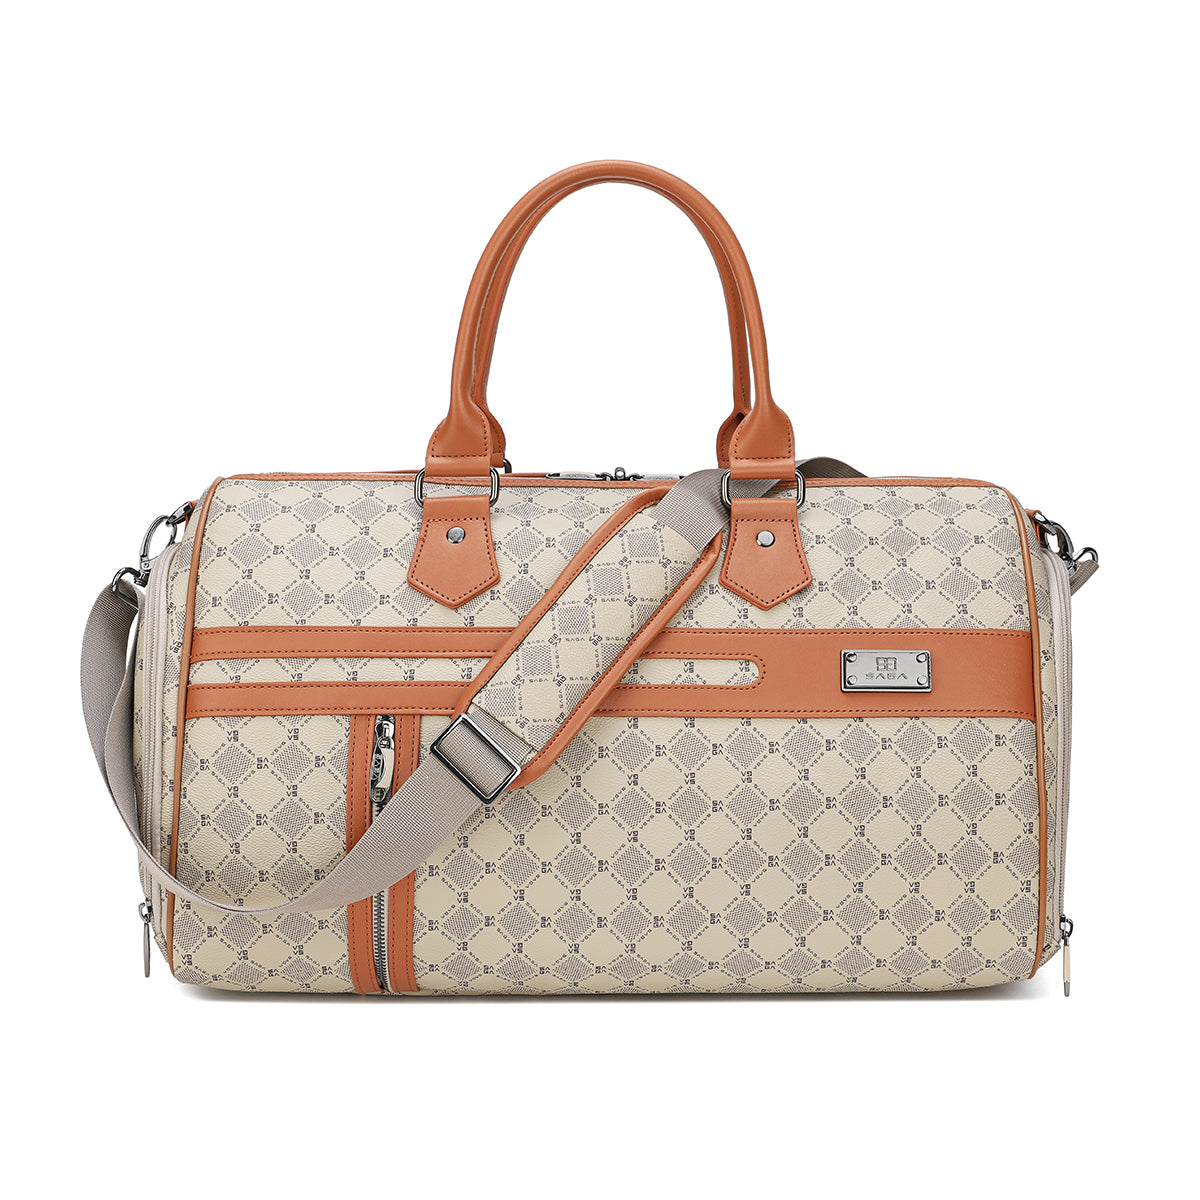 A luxurious and extremely durable travel bag in several sizes, khaki colour